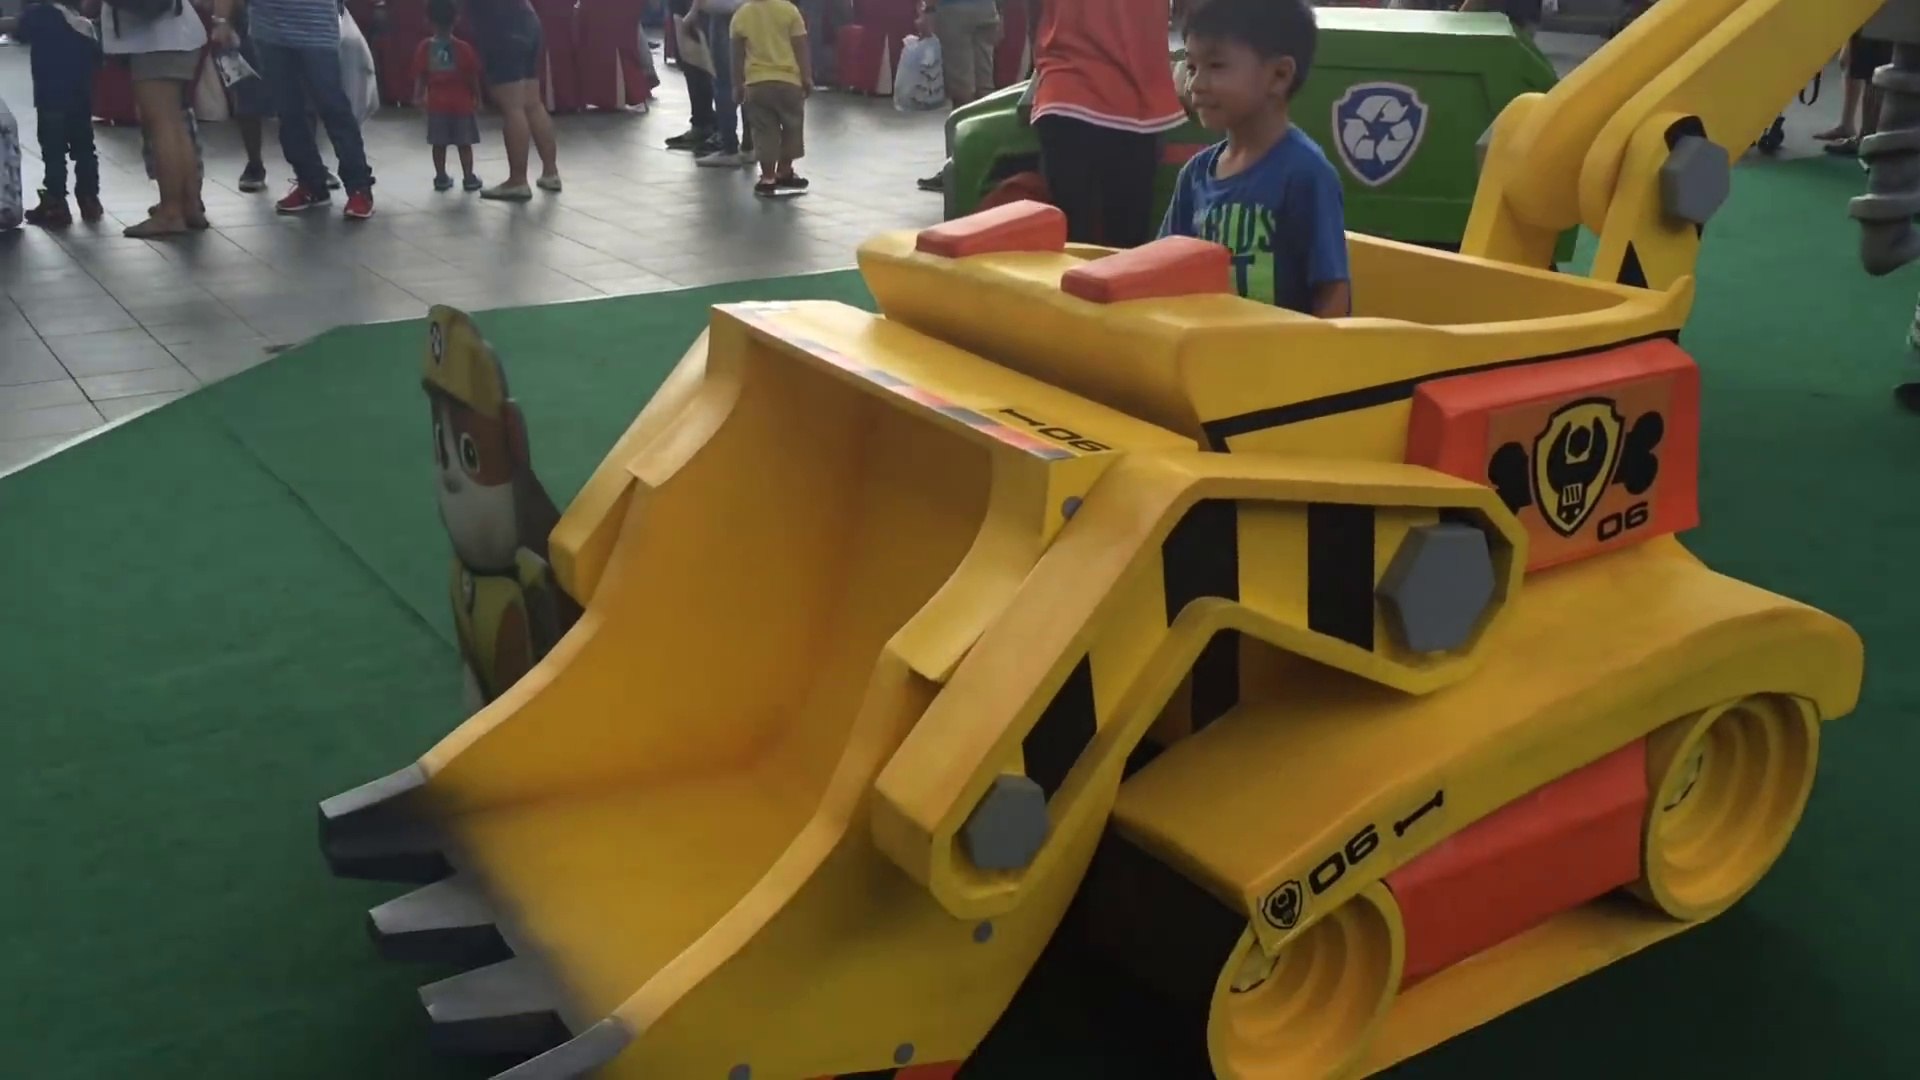 Life-sized Patrol Vehicles and Meet & Greet at Paw Patrol Ready for Action Event - video Dailymotion